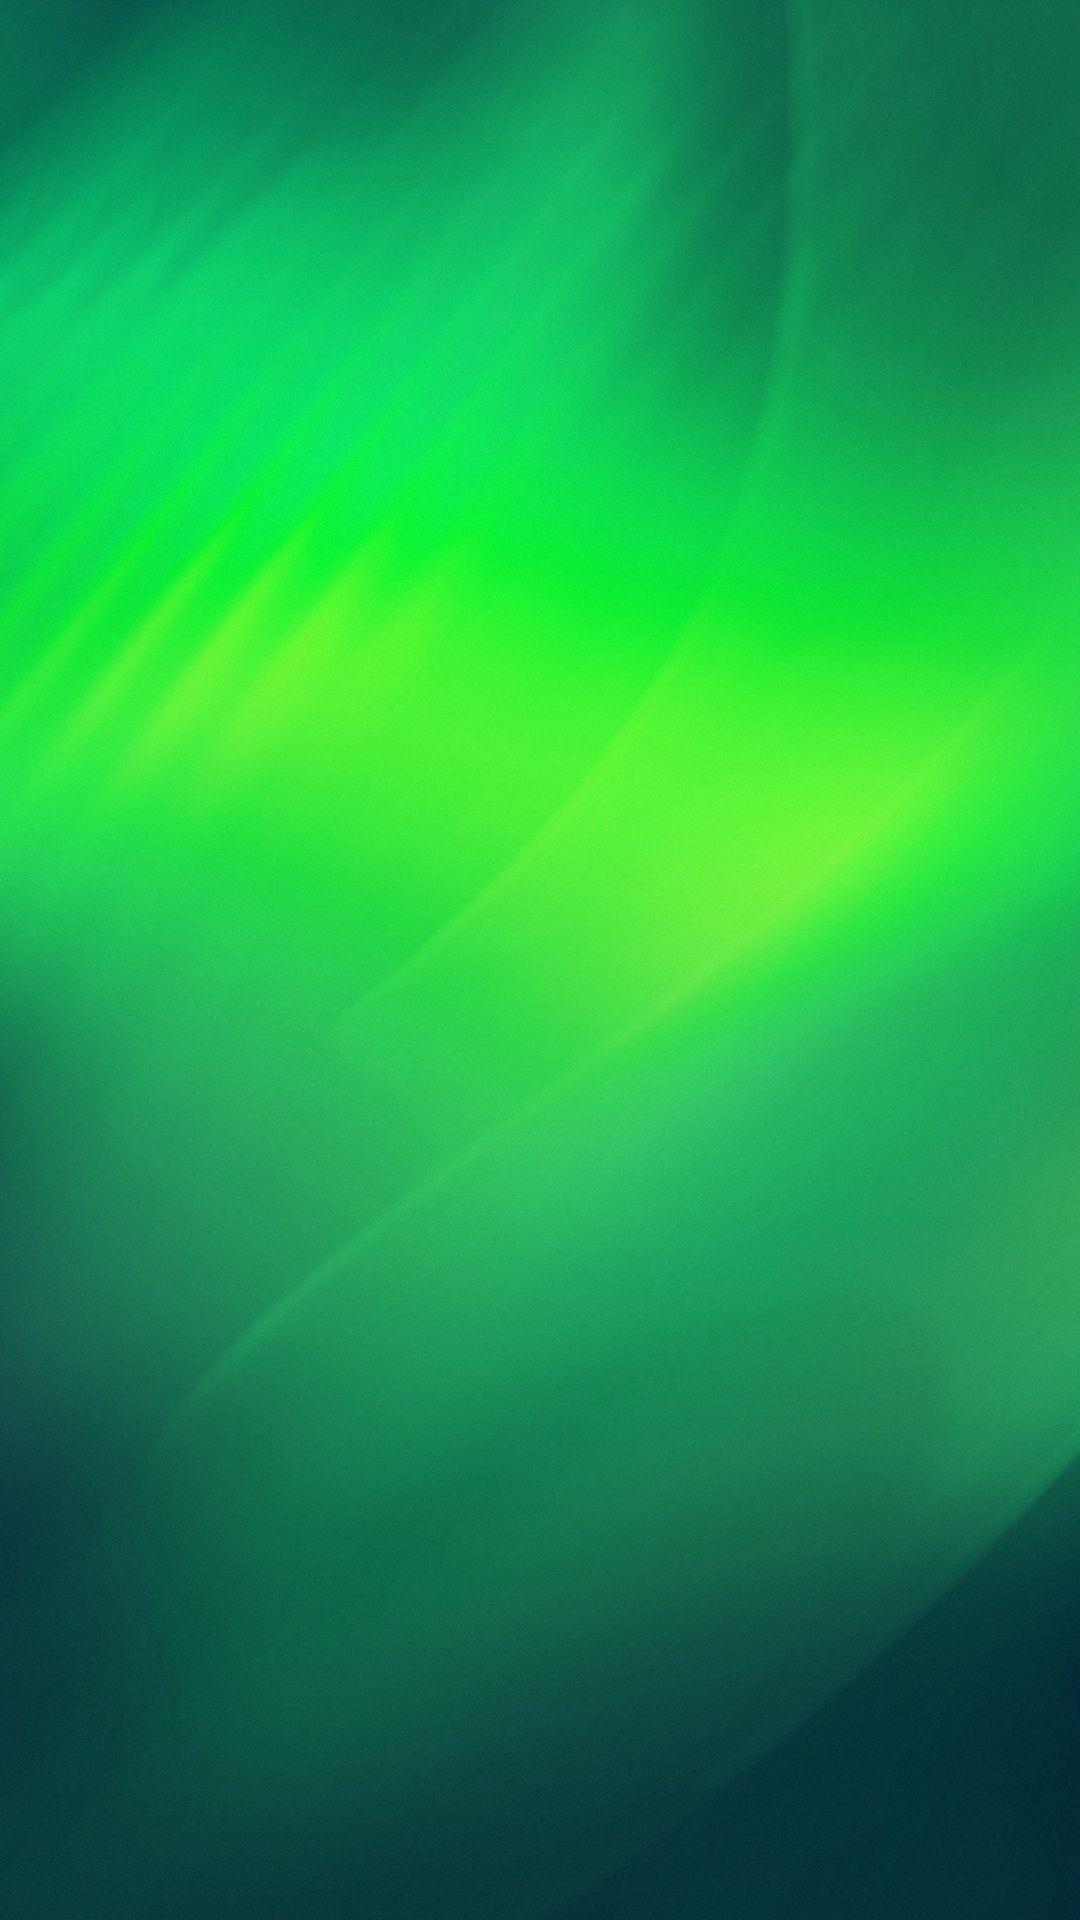 Abstract Green Light Pattern iPhone 6 .com